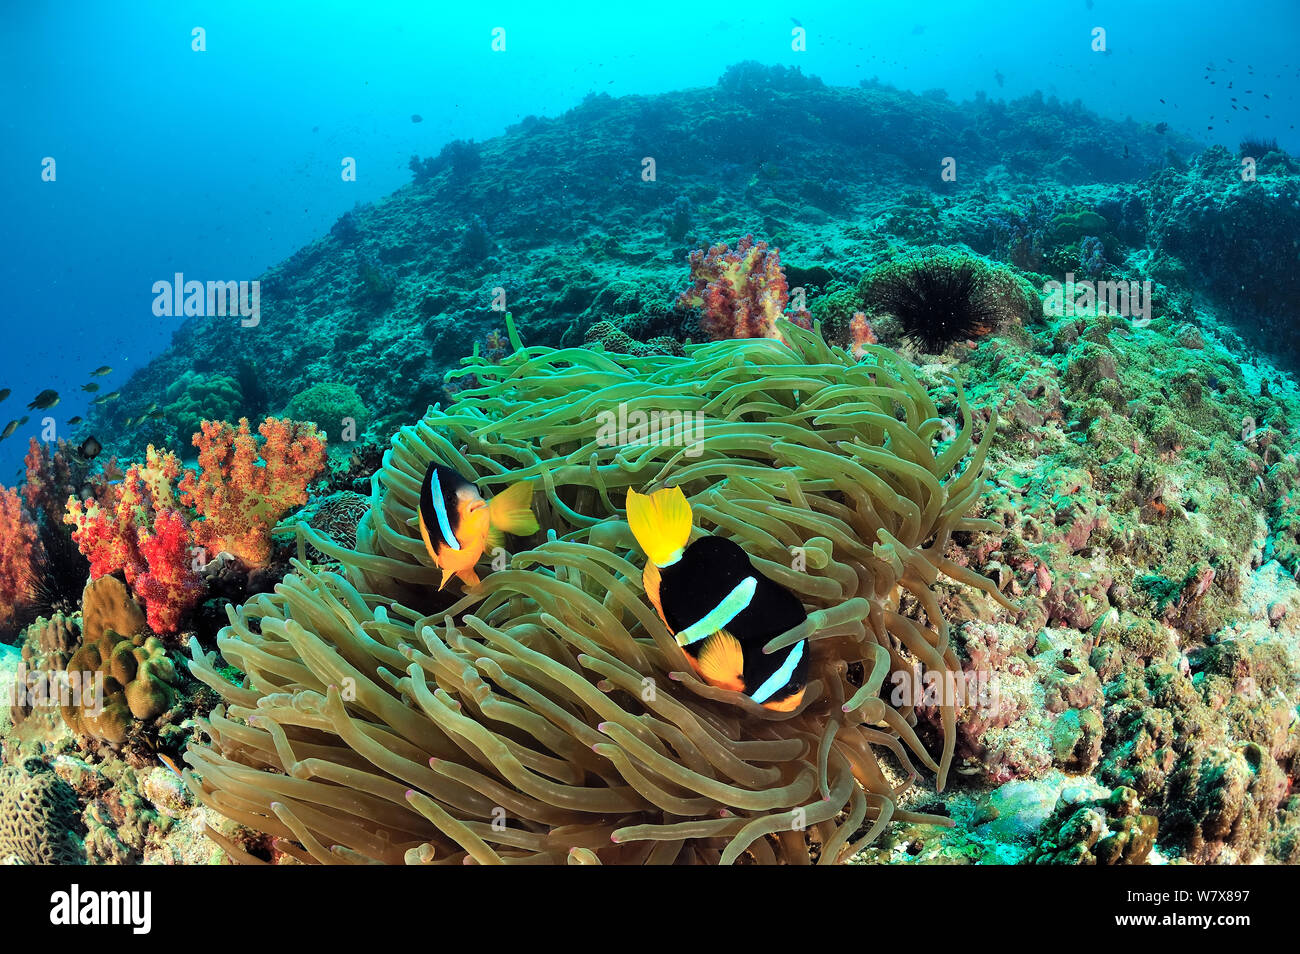 Clark's anemonefish (Amphiprion clarkii) in Magnificent sea anemone, Daymaniyat islands, Oman. Gulf of Oman. Stock Photo